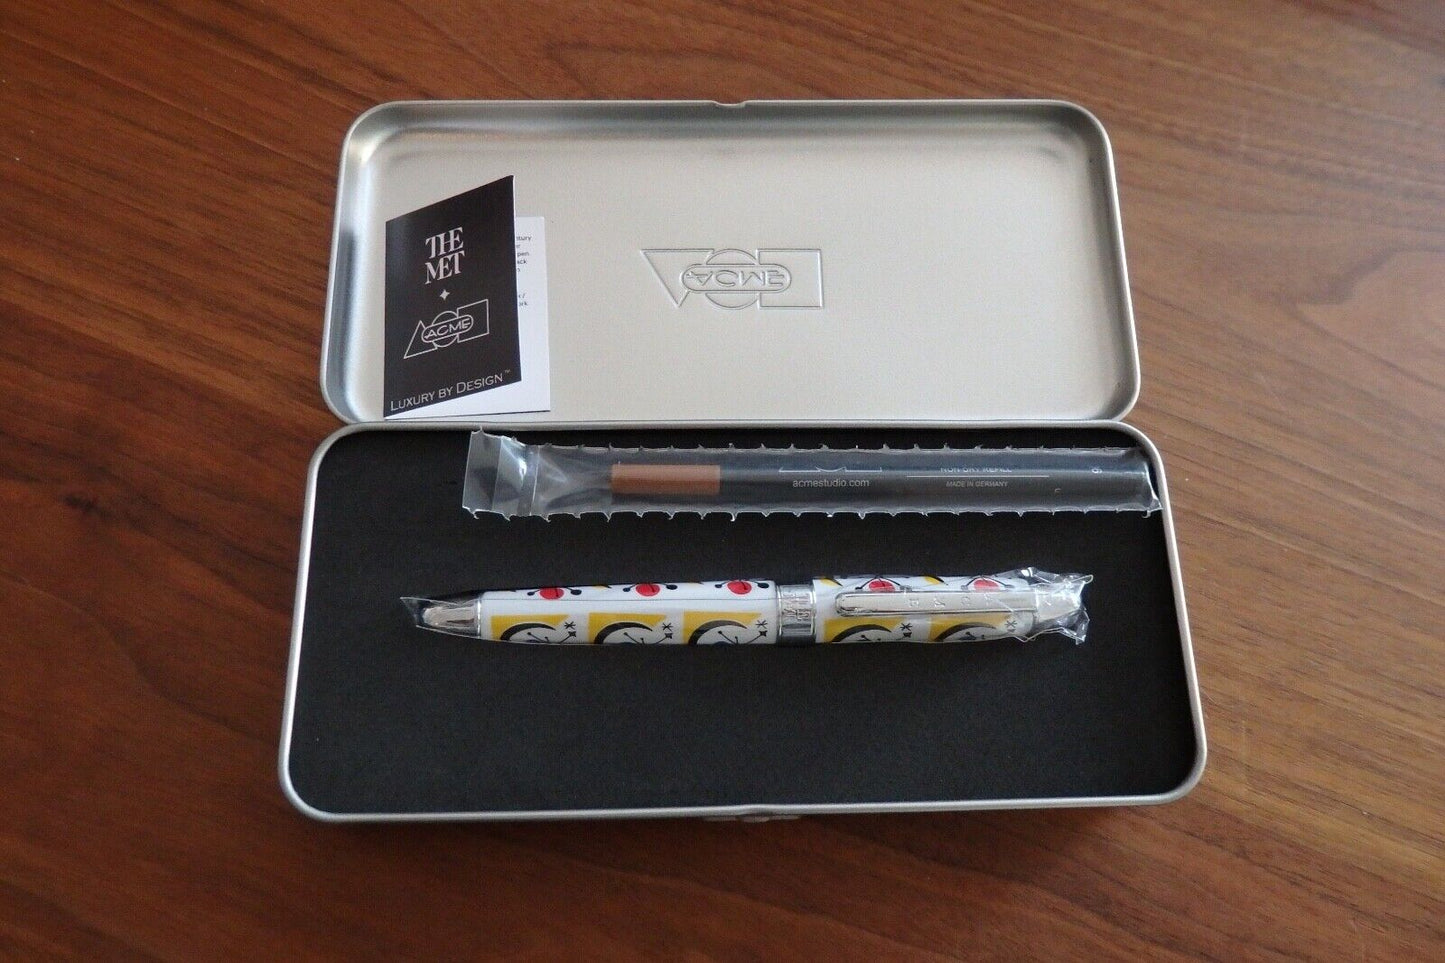 ACME Studio "The Met" Rollerball Pen- by A. CALDER - NEW